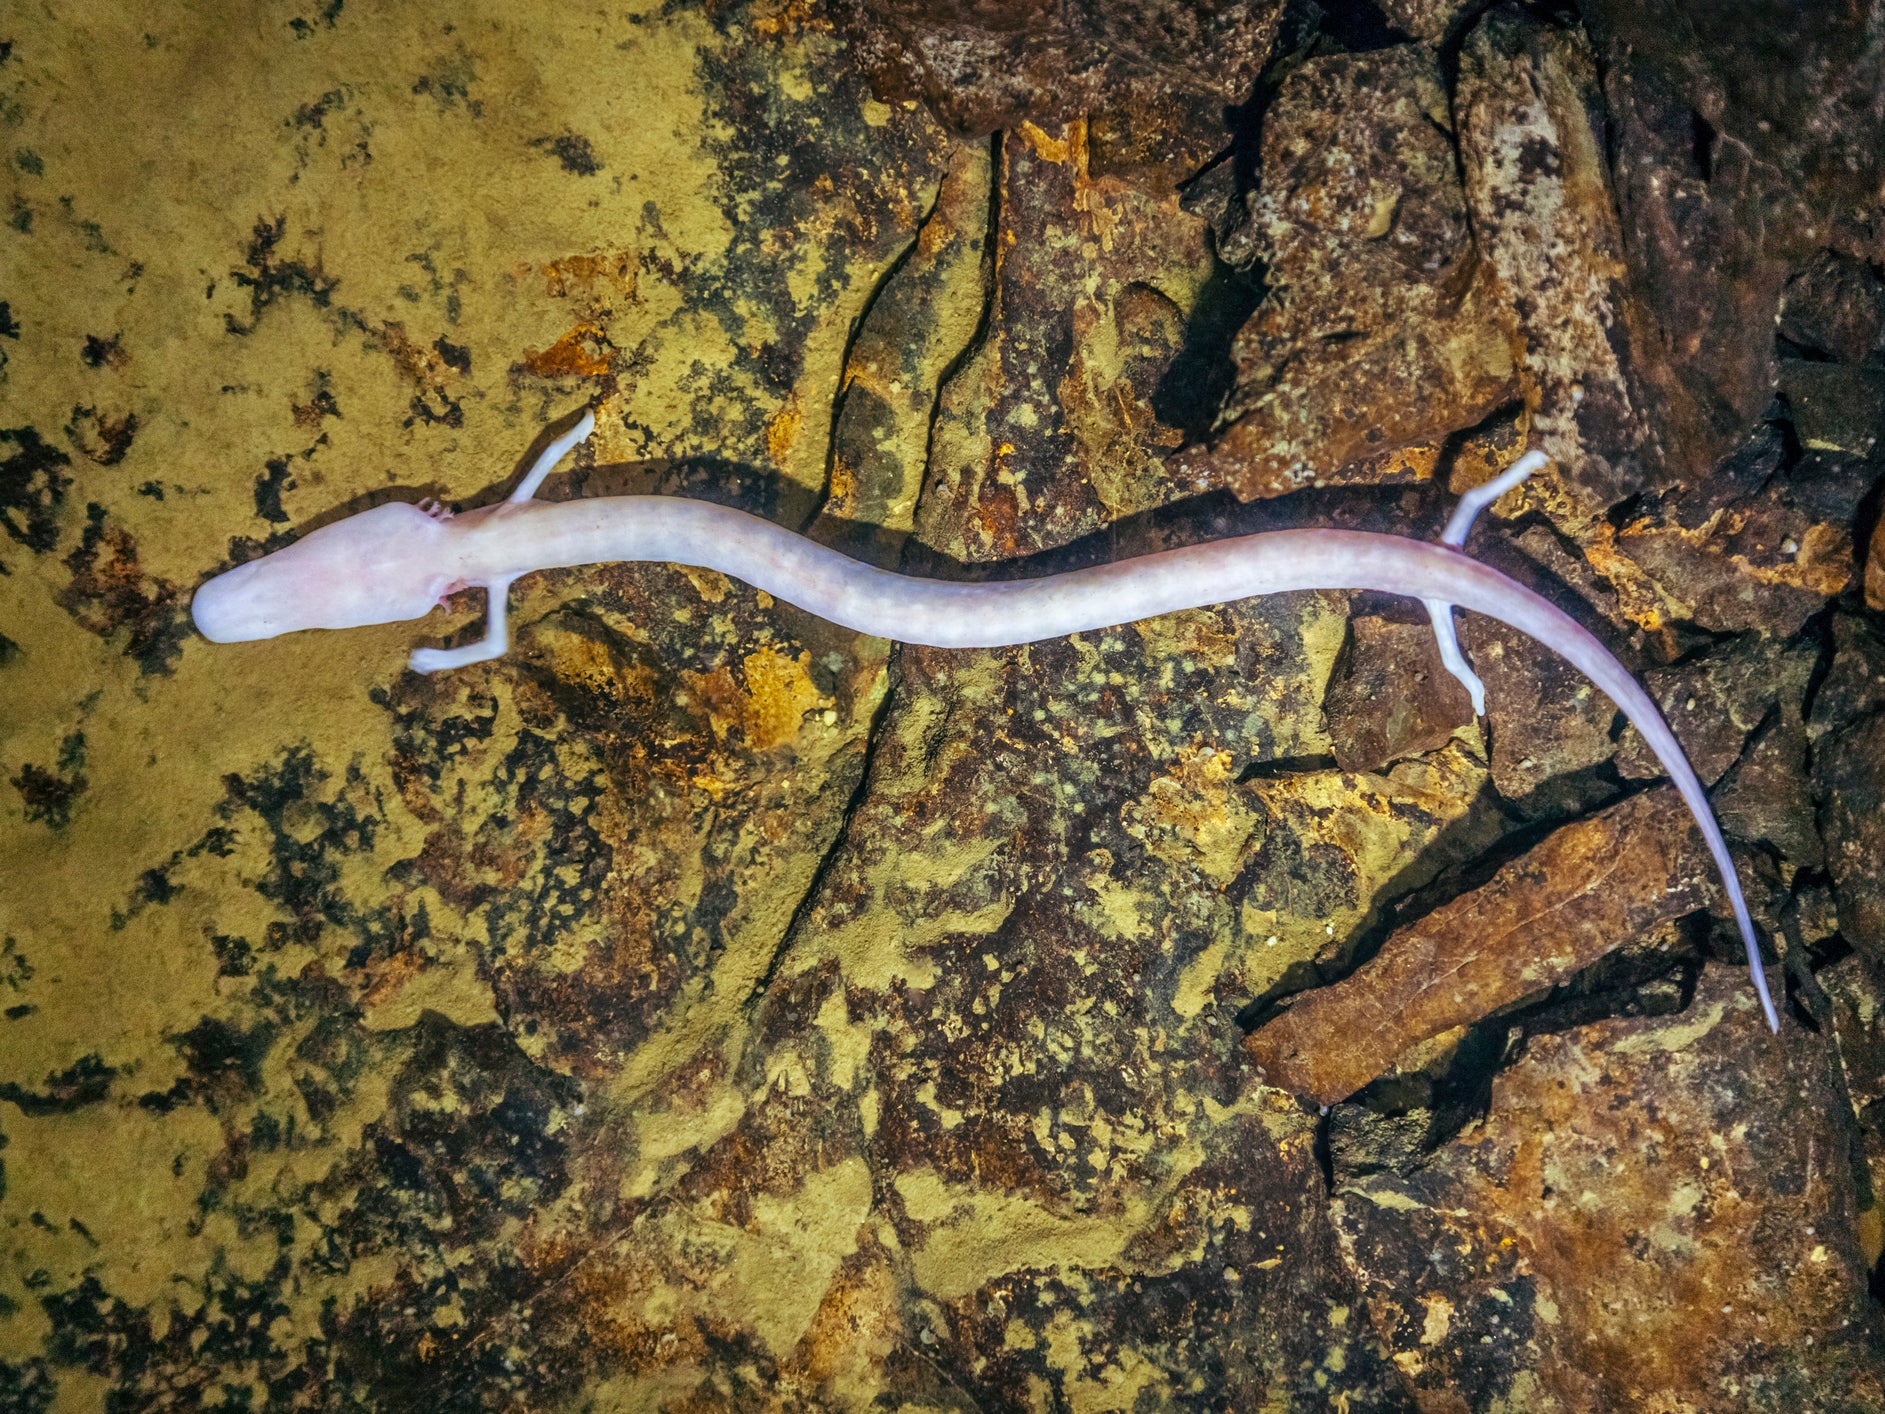 Once an olm finds a comfortable spot, it can stay there for a long time